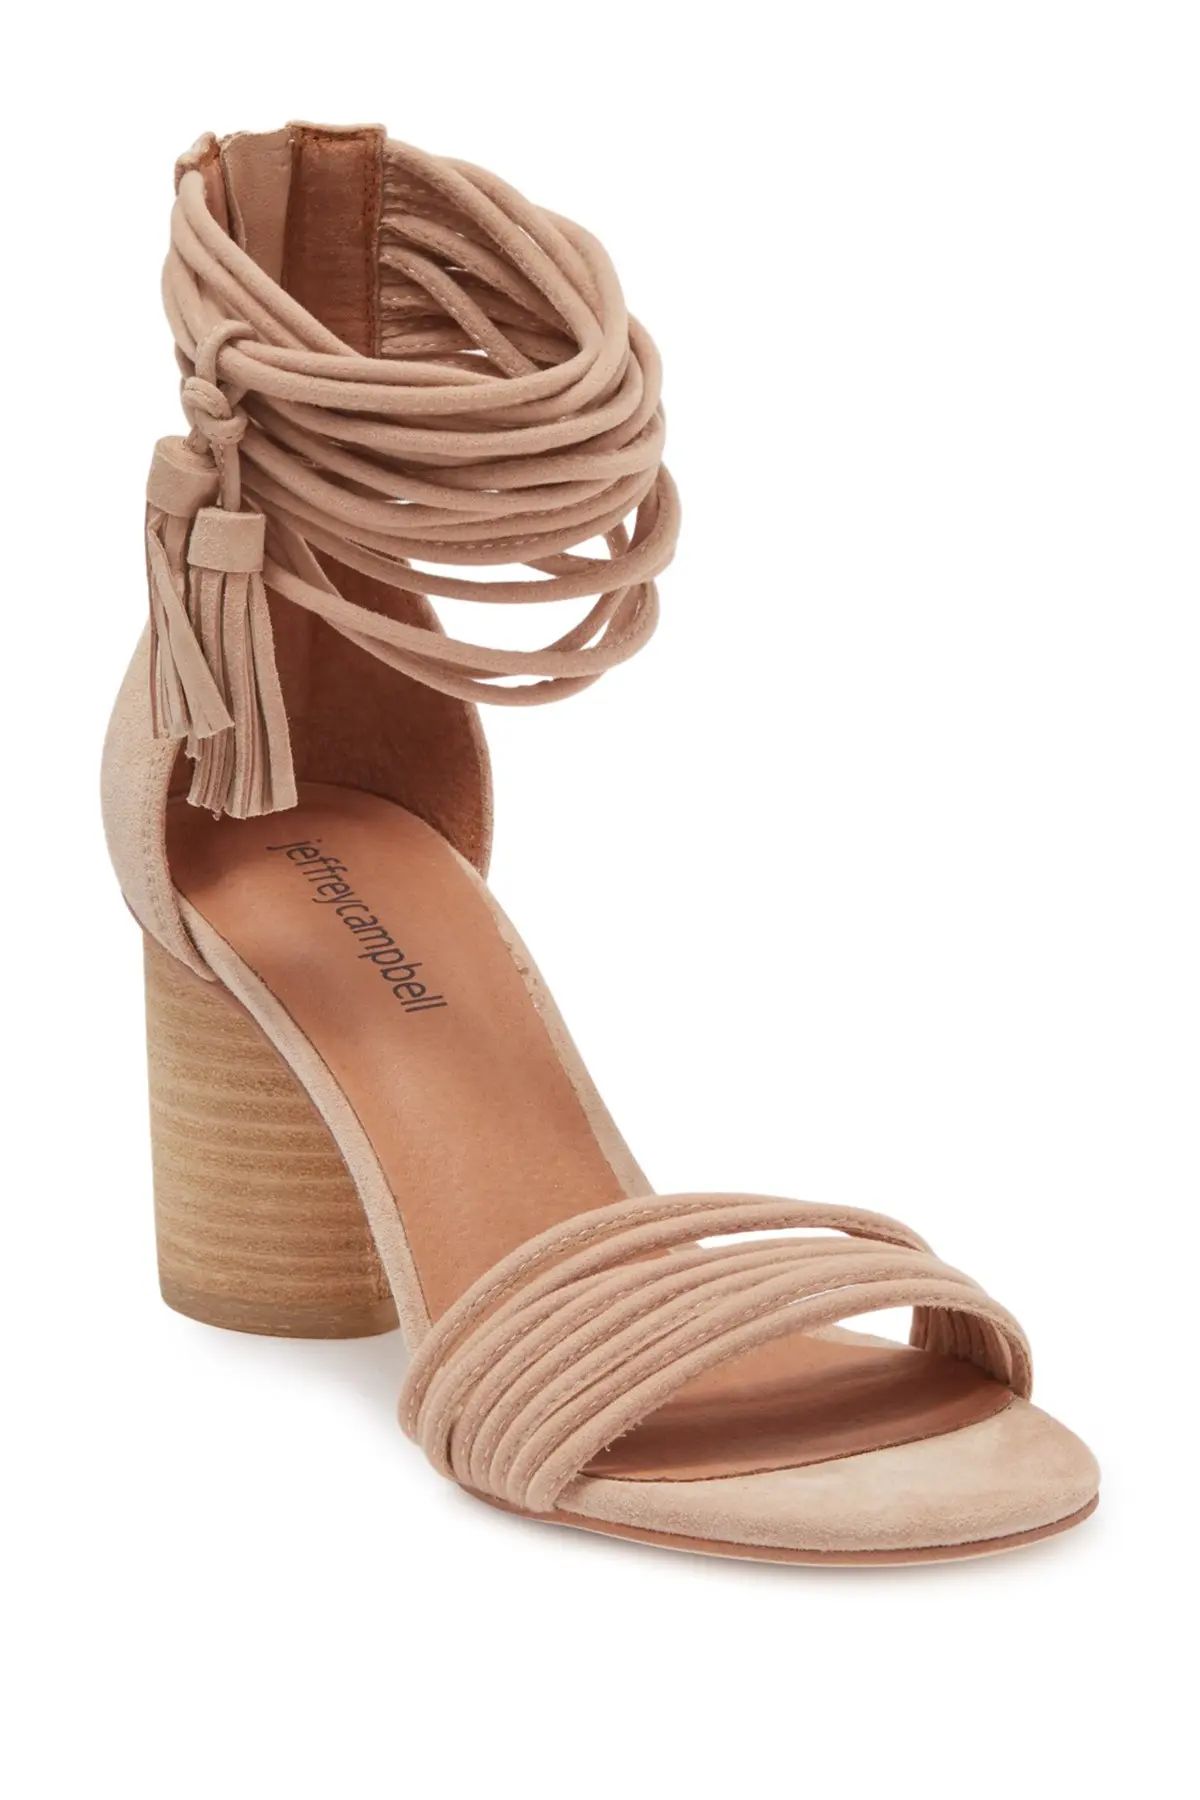 Jeffrey Campbell Among MH Cord Wrapped Ankle Strap Suede Sandal at Nordstrom Rack | Hautelook